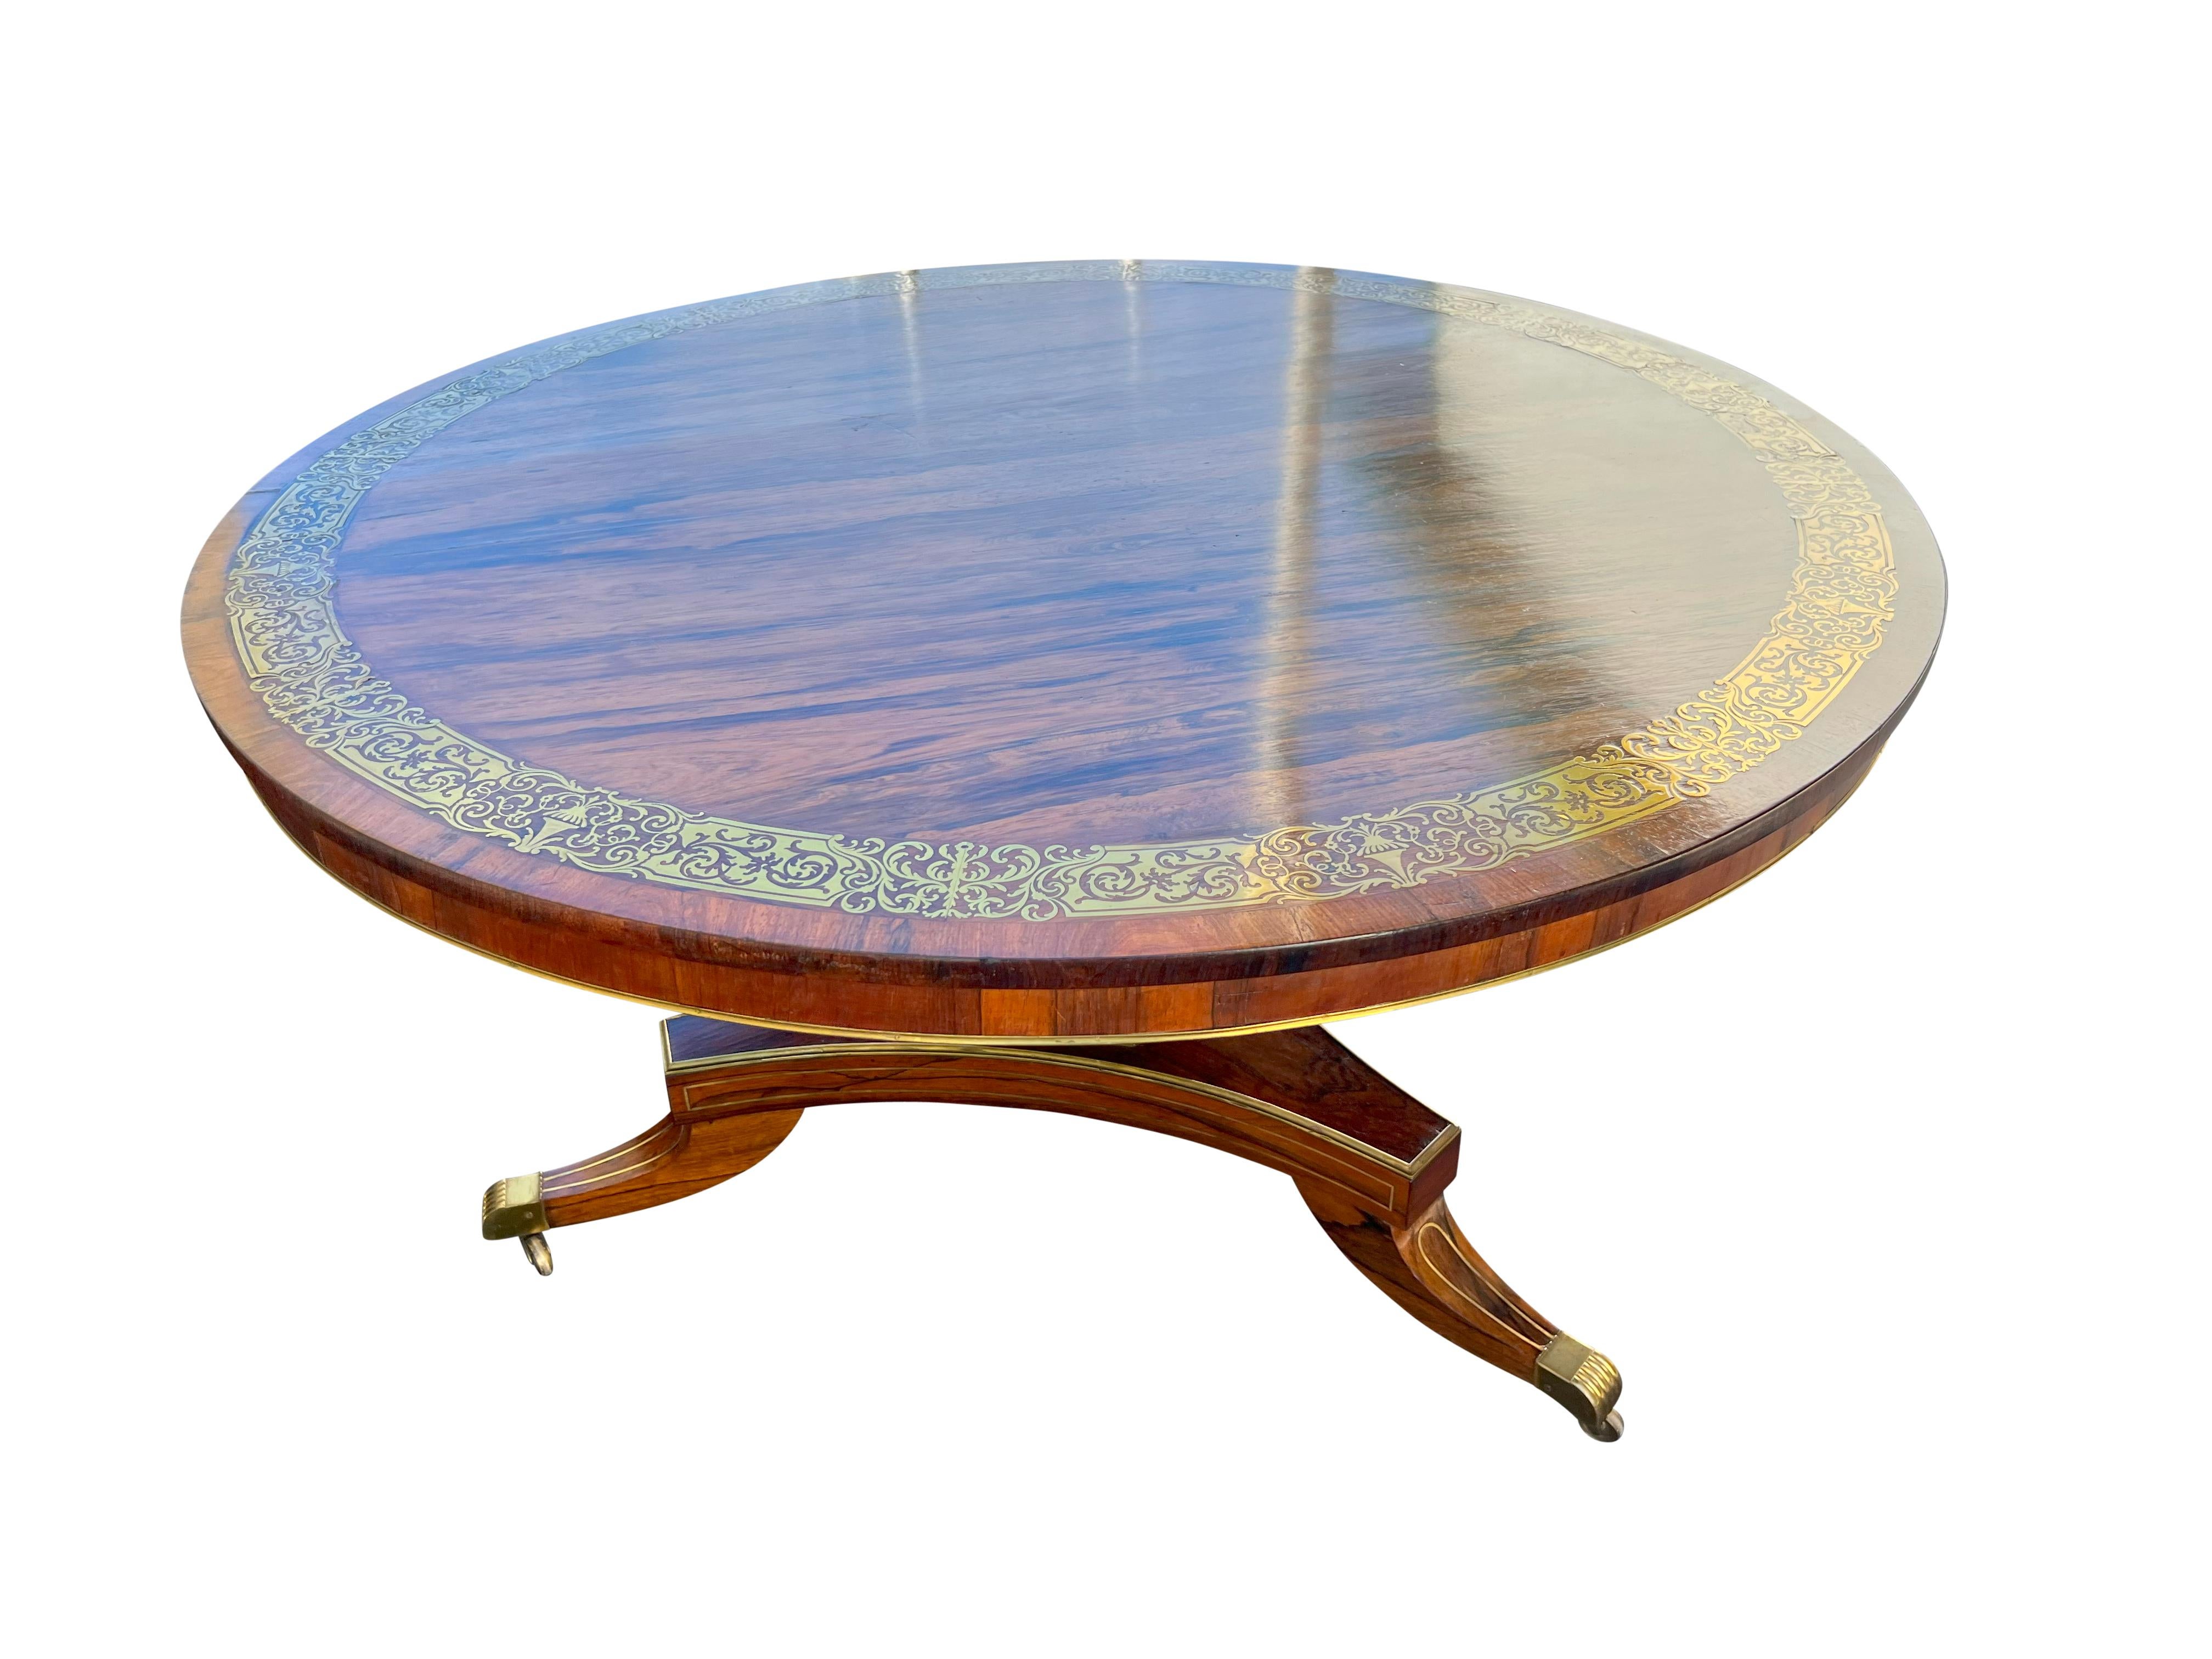 Early 19th Century Regency Rosewood And Brass Inlaid Center Table For Sale